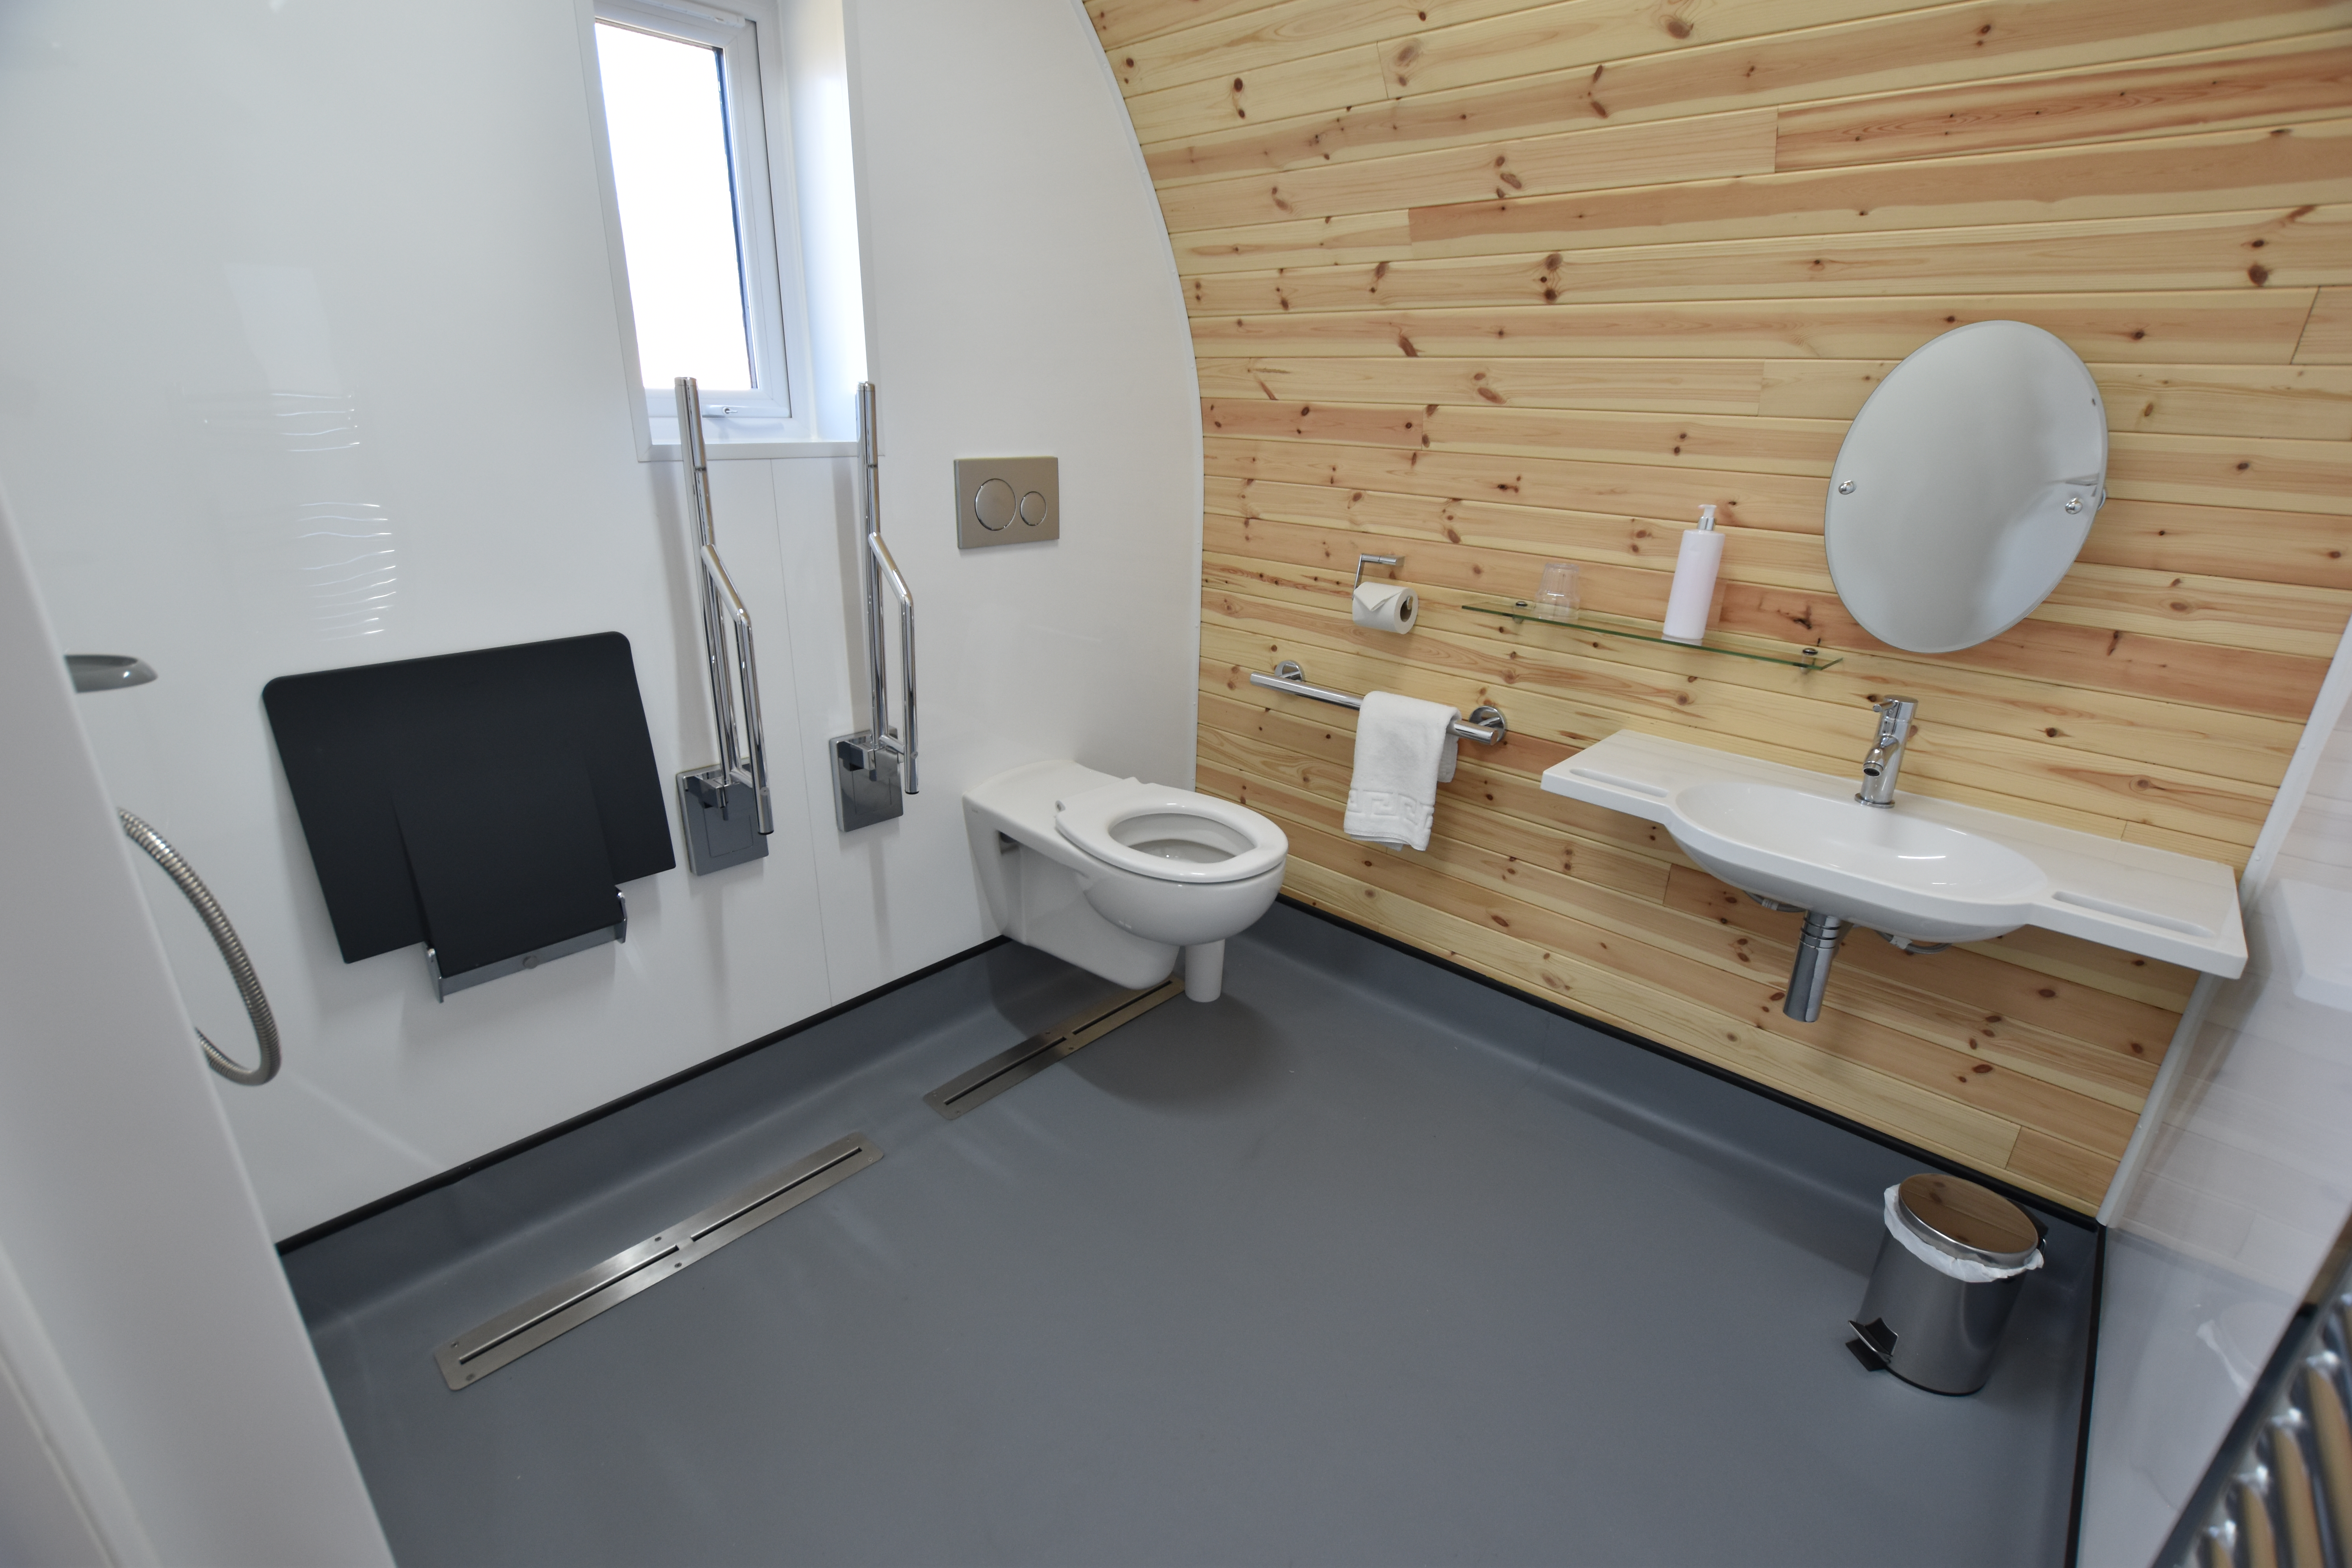 Accessible OmniPod bathroom featuring curved natural wood clad wall, wall-mounted basin with integrated handgrips, toilet, and shower seat with grab rails.